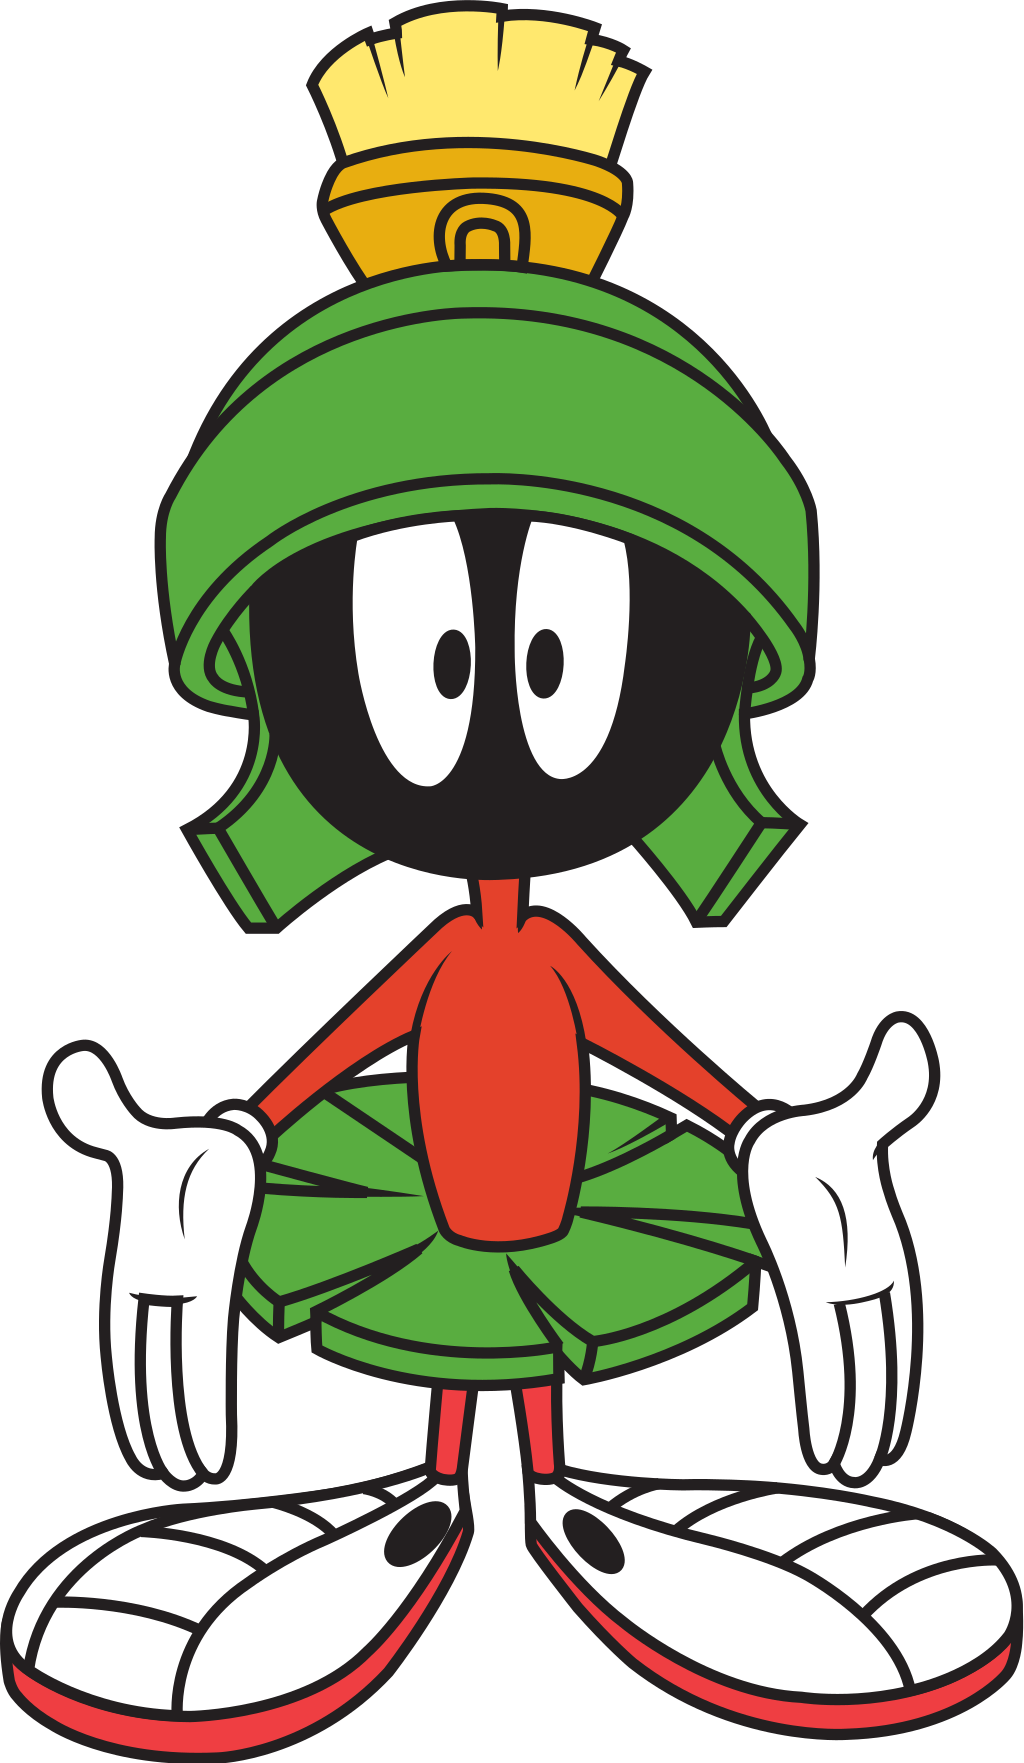 Marvin the Martian, from the Warner Brothers Bugs Bunny cartoons